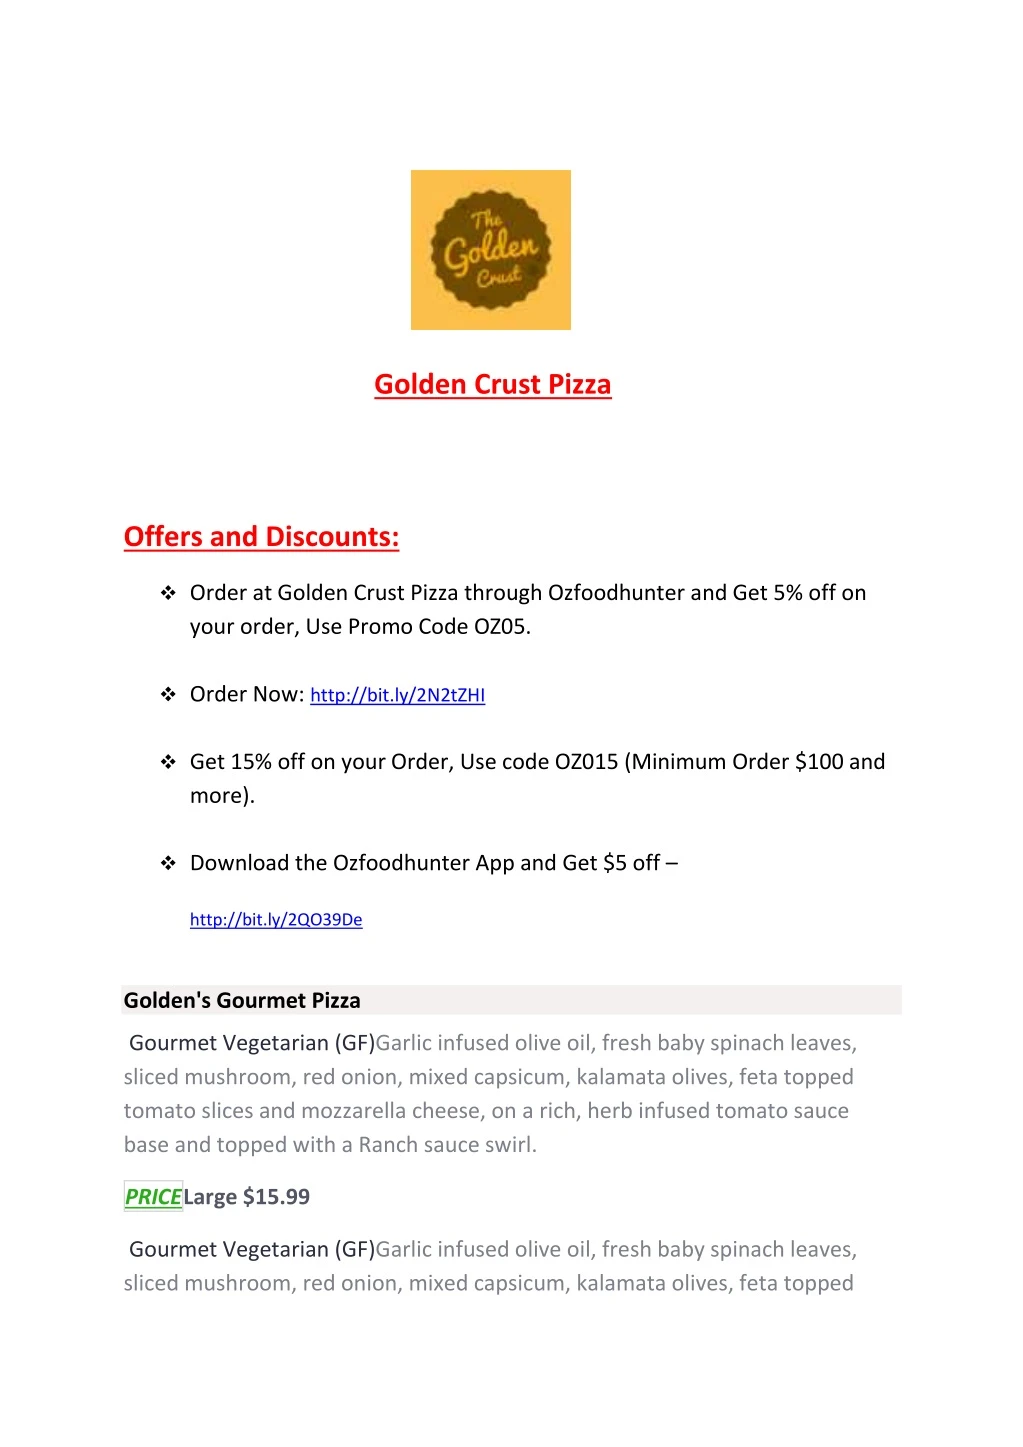 golden crust pizza offers and discounts